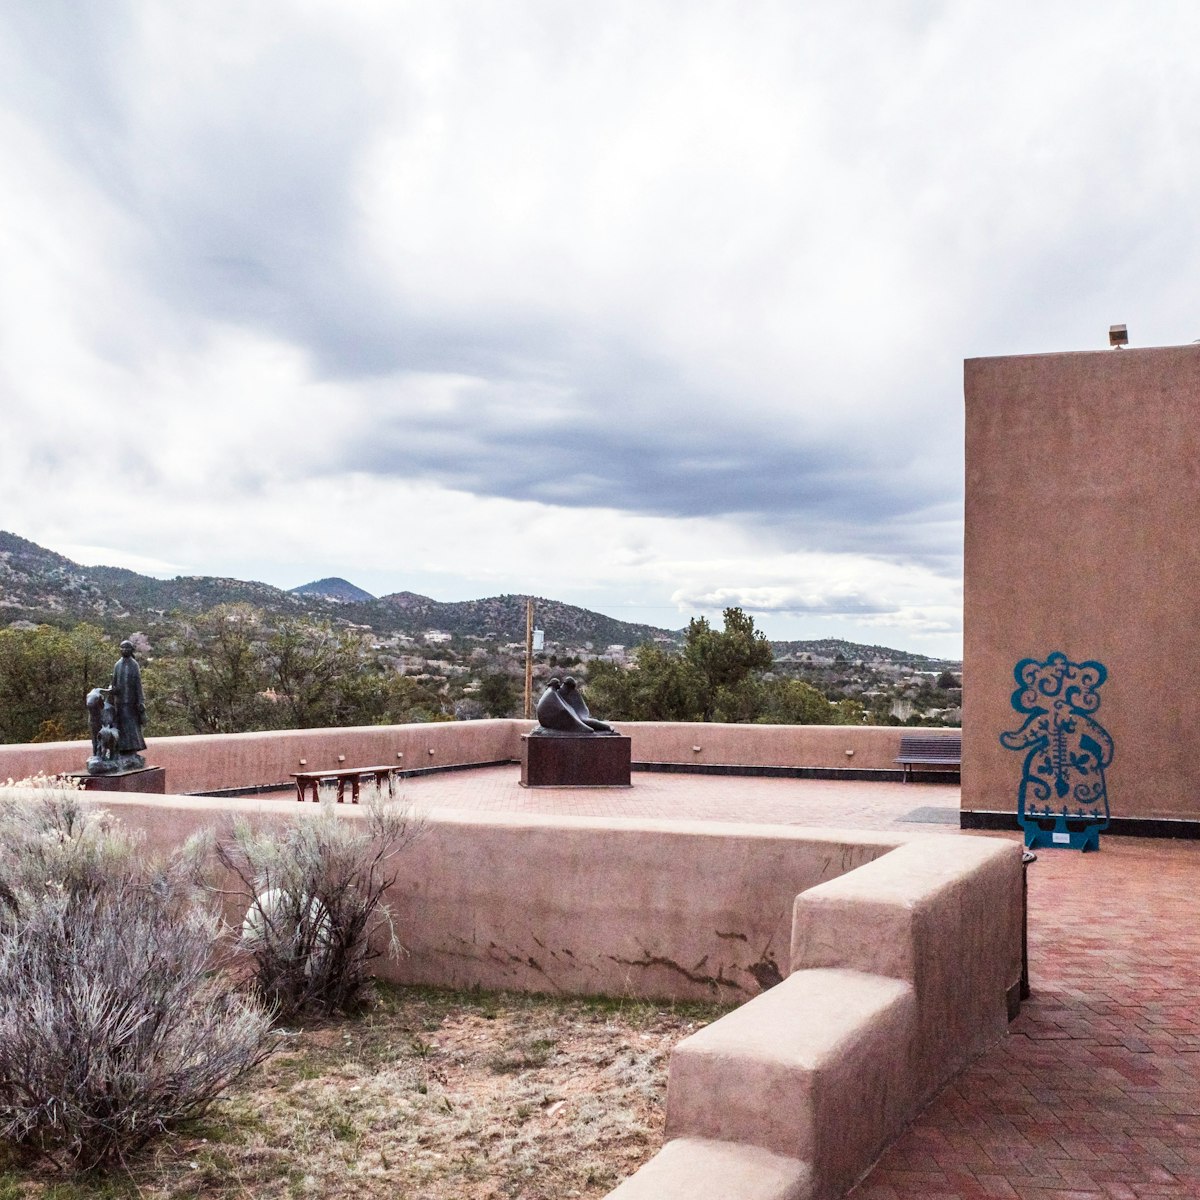 April 3, 2019: Santa Fe, New Mexico, USA: Sculptures outside of Wheelwright Museum of the American Indian, with desert landscape and mountains
Sculptures outside of Wheelwright Museum of the American Indian - stock photo
